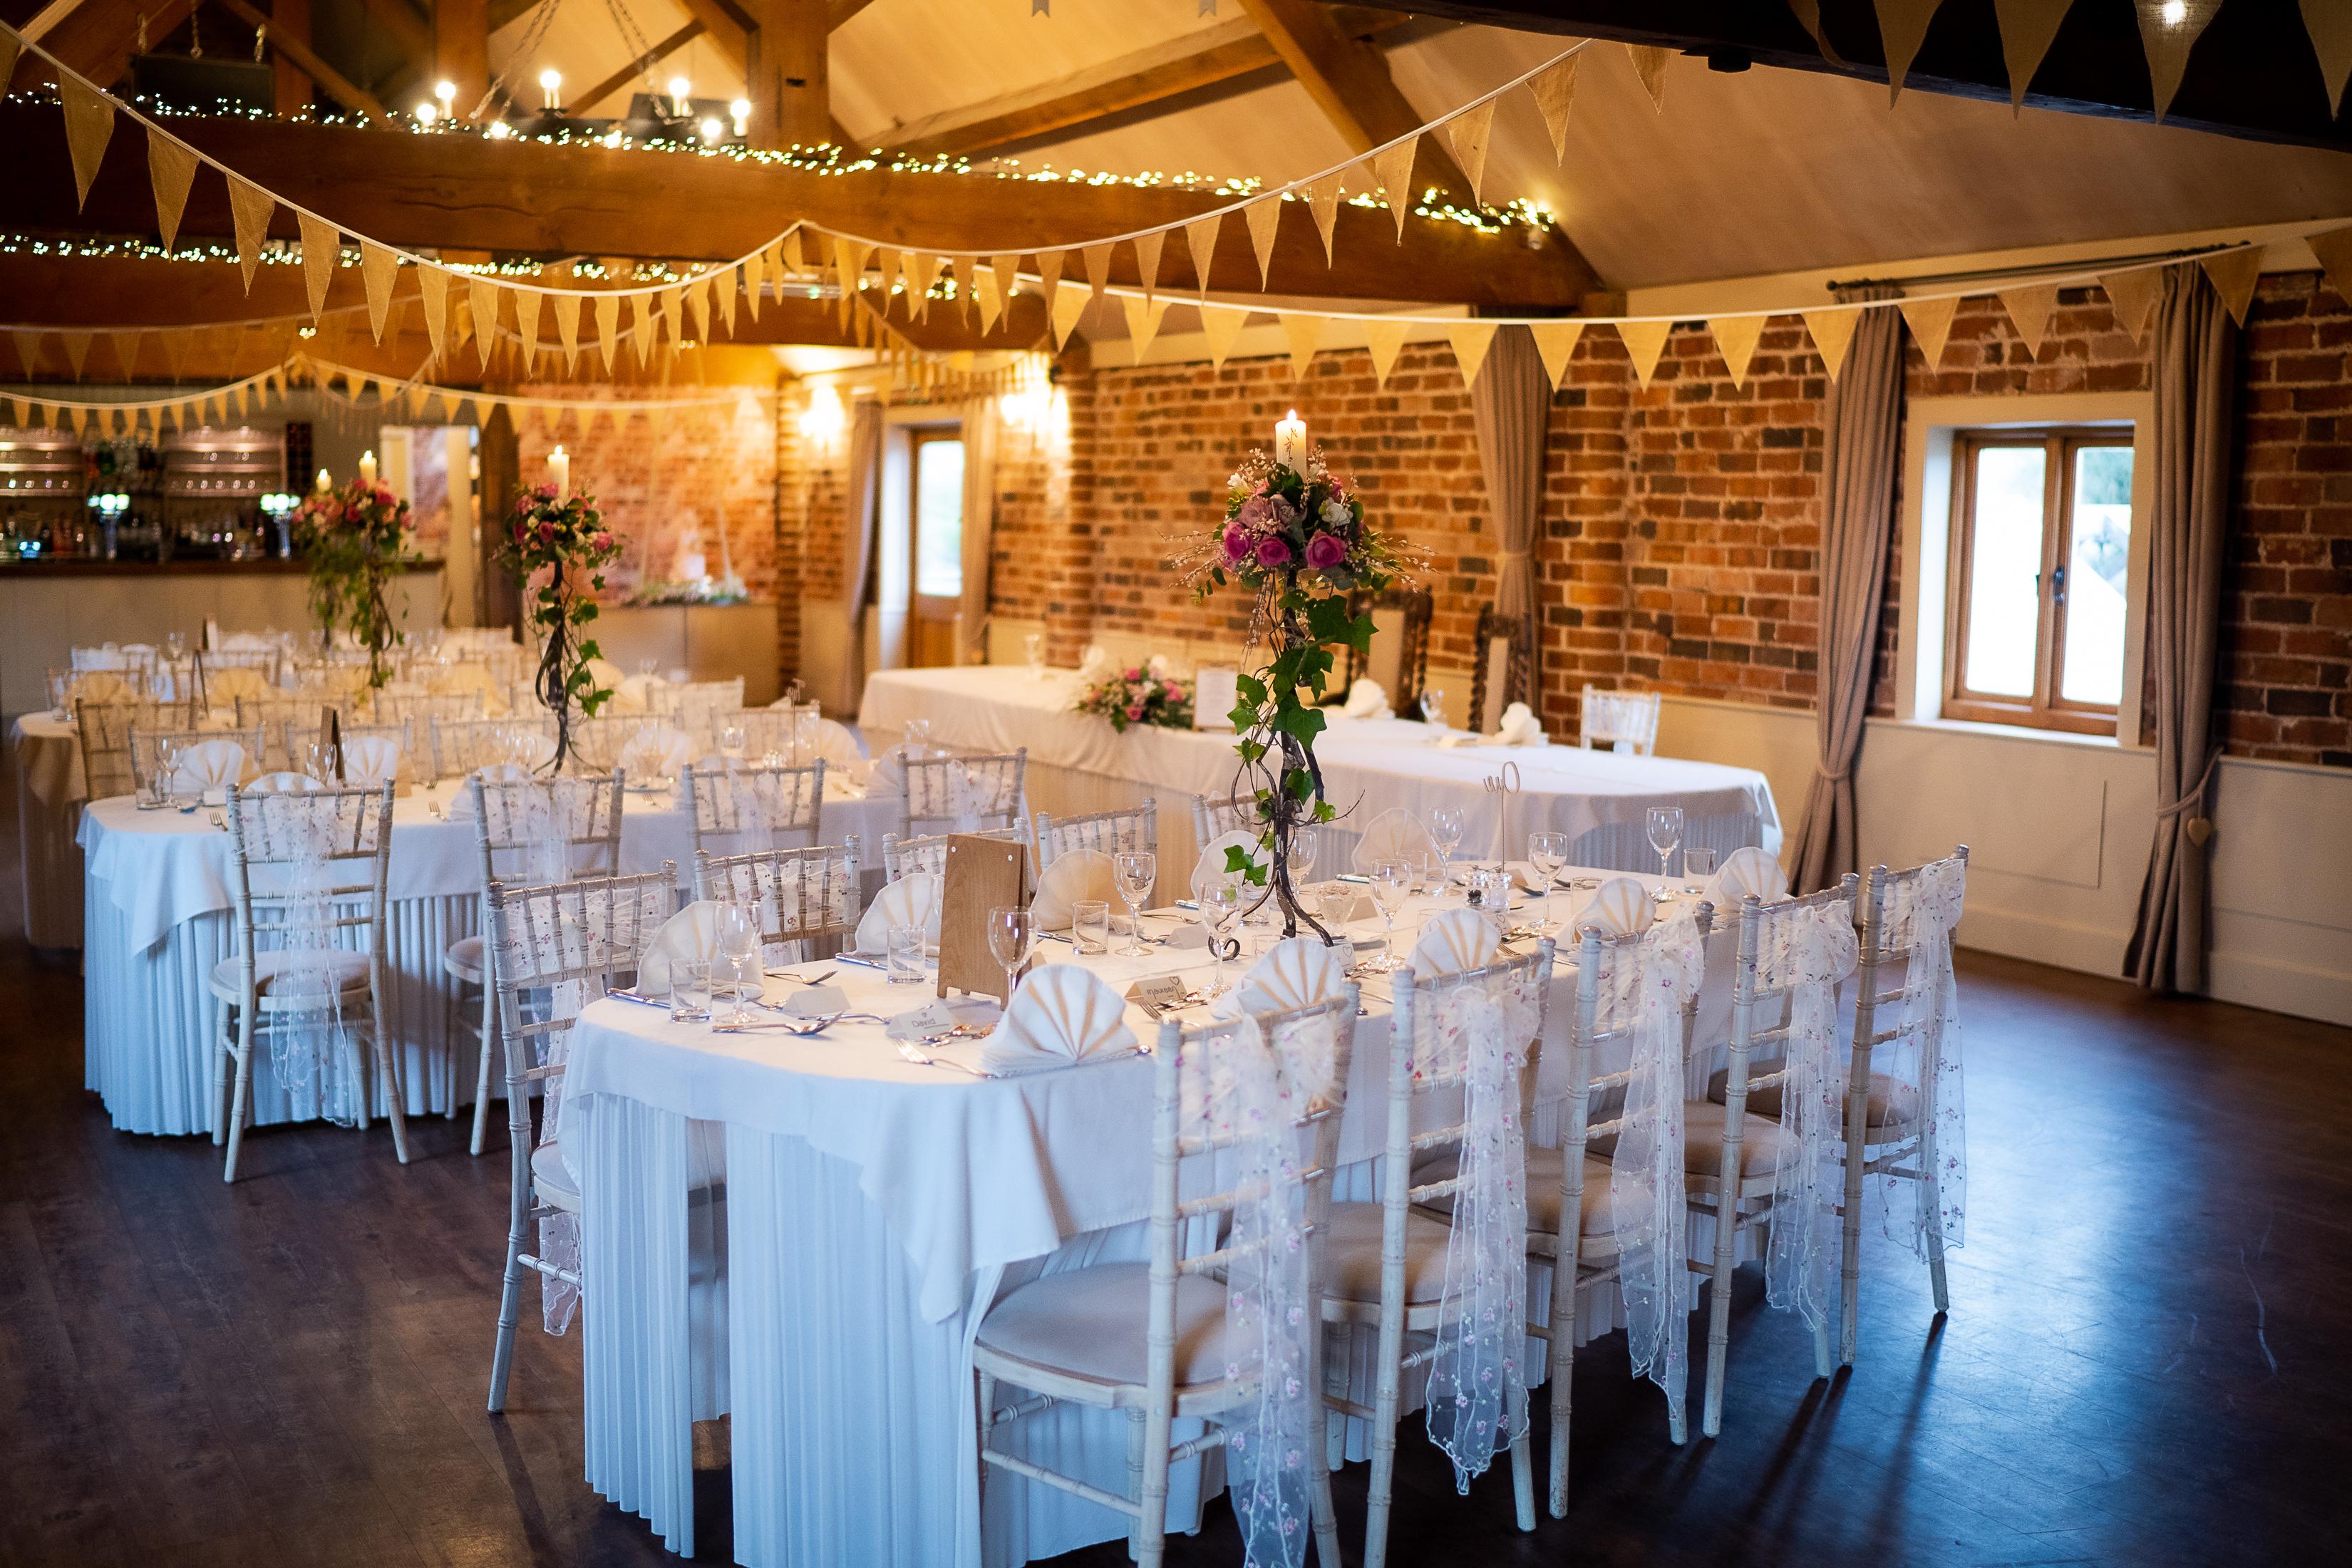 The Maltings Barn Daytime Event Hire, The Blakelands Estate photo #2